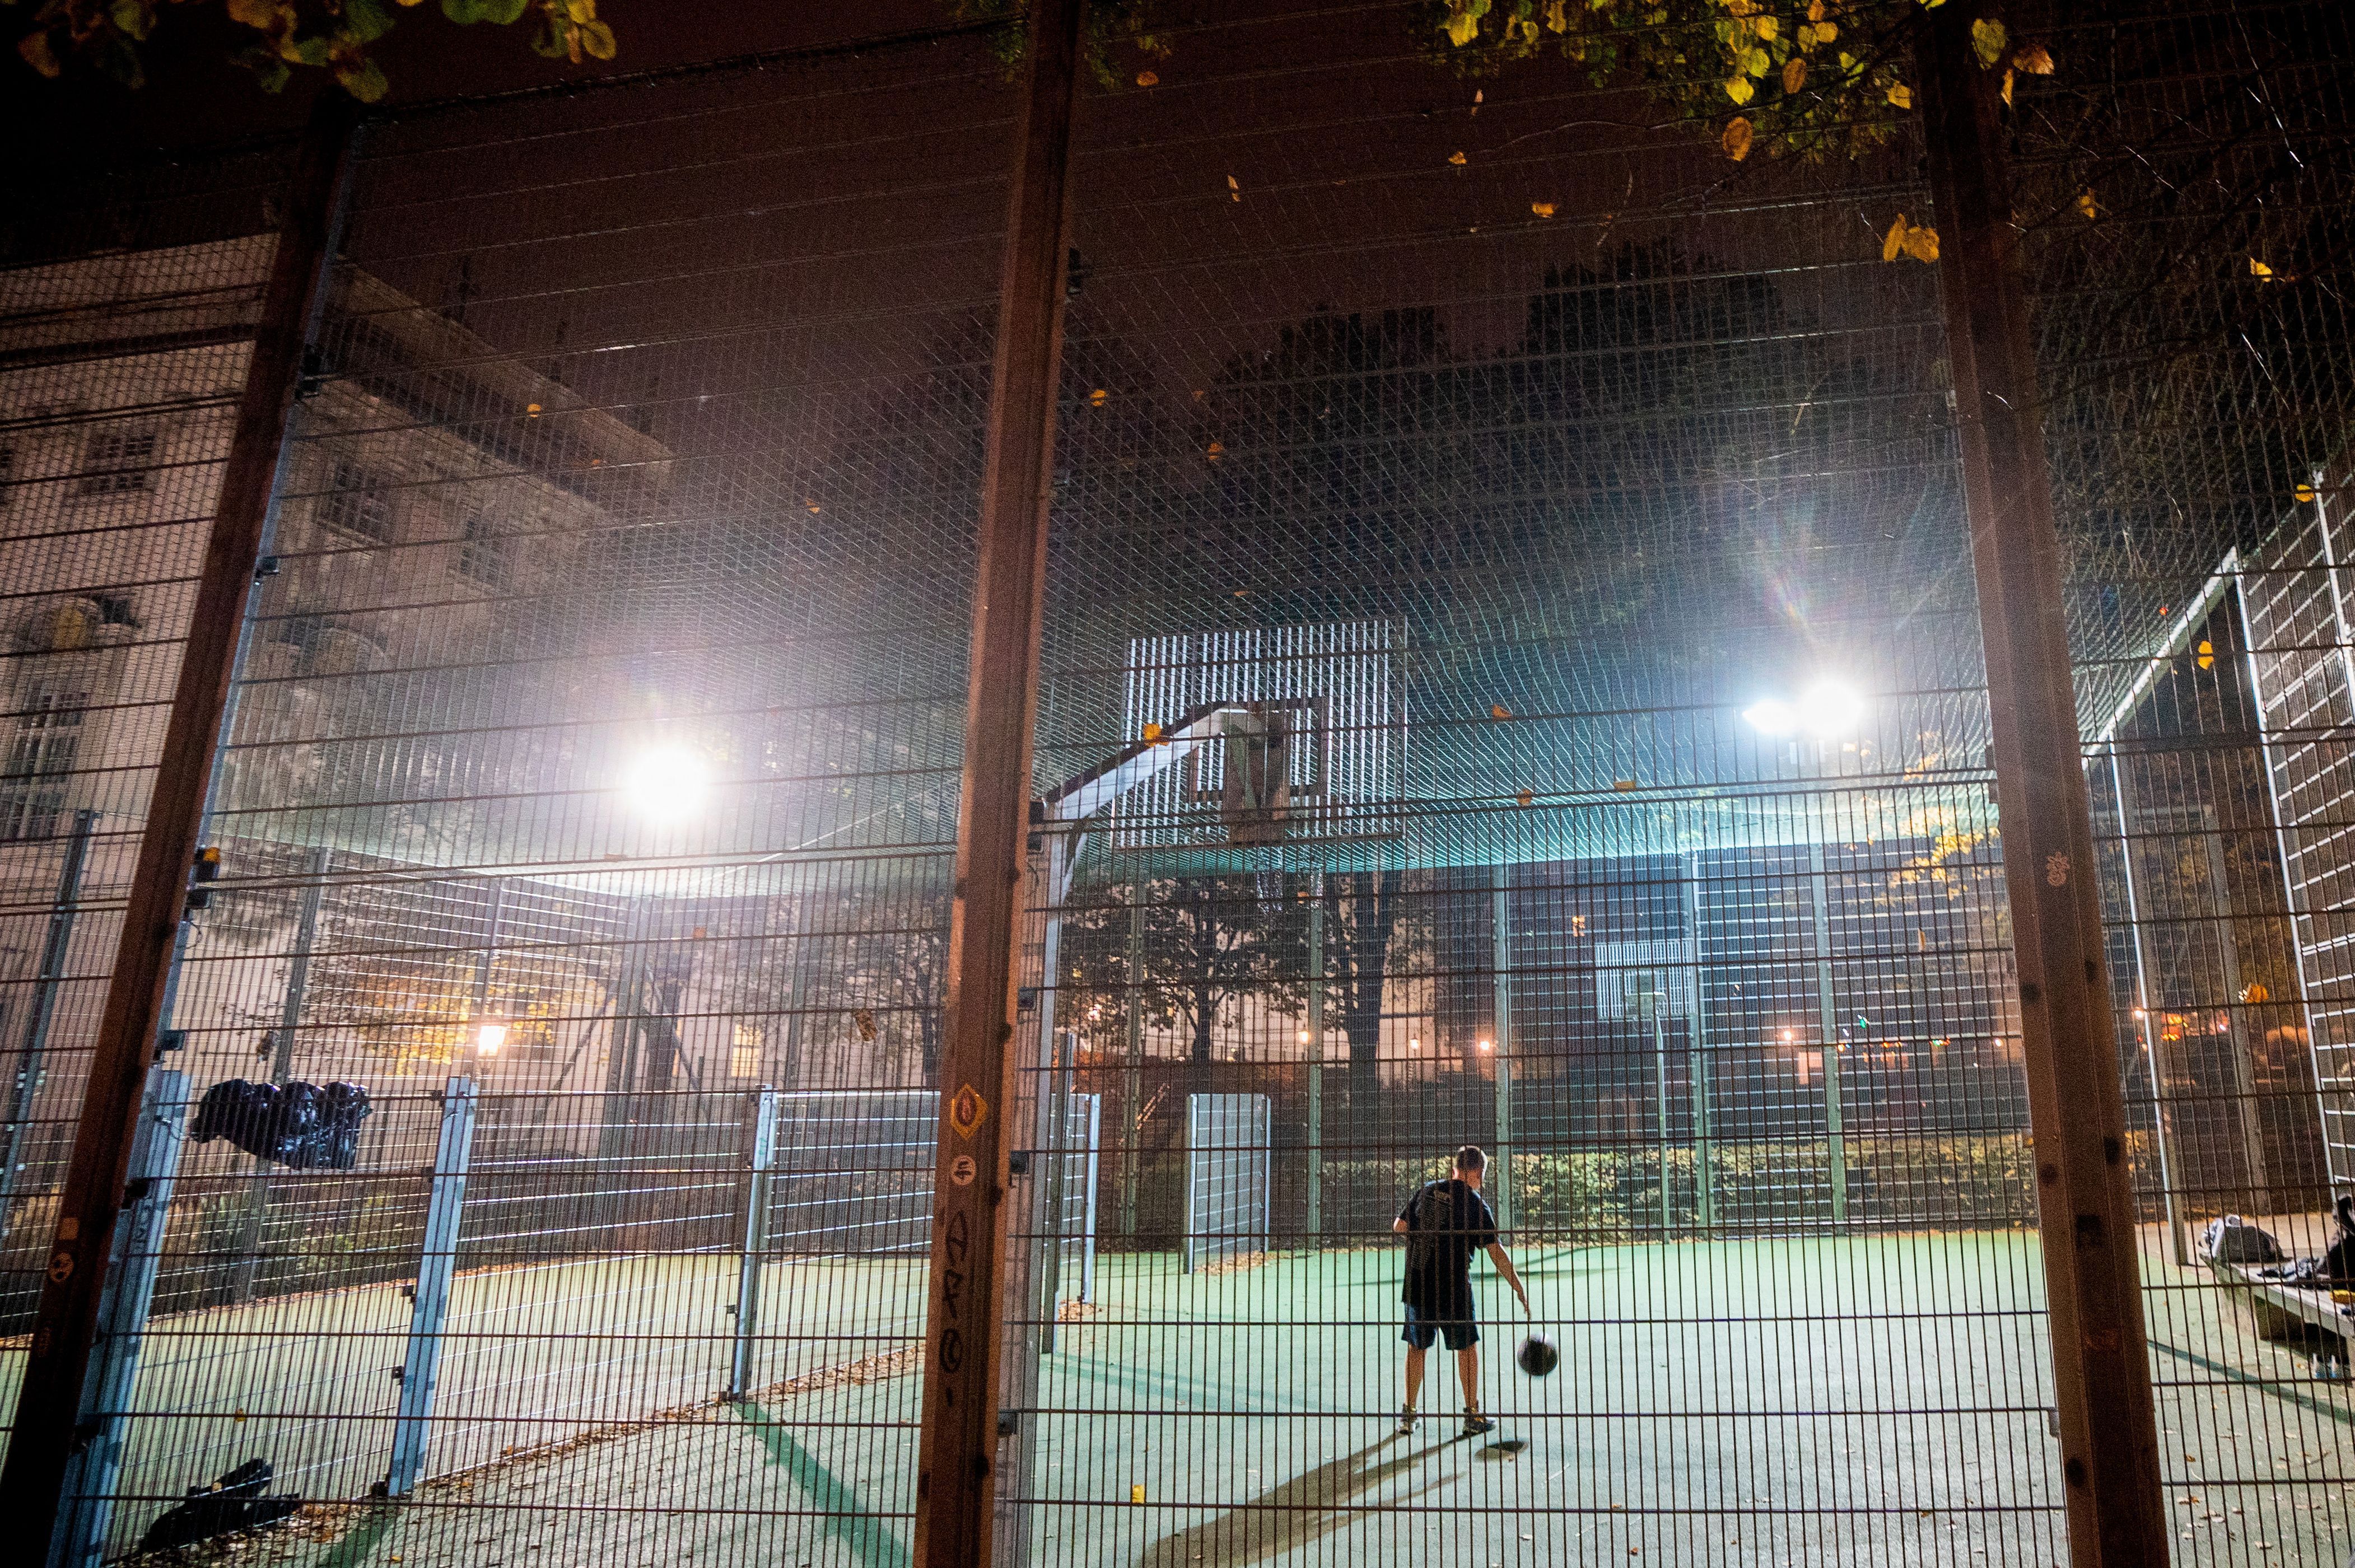 A teenager in a basketball cage in Vienna on Nov. 9, during the new lockdown that began Nov. 3